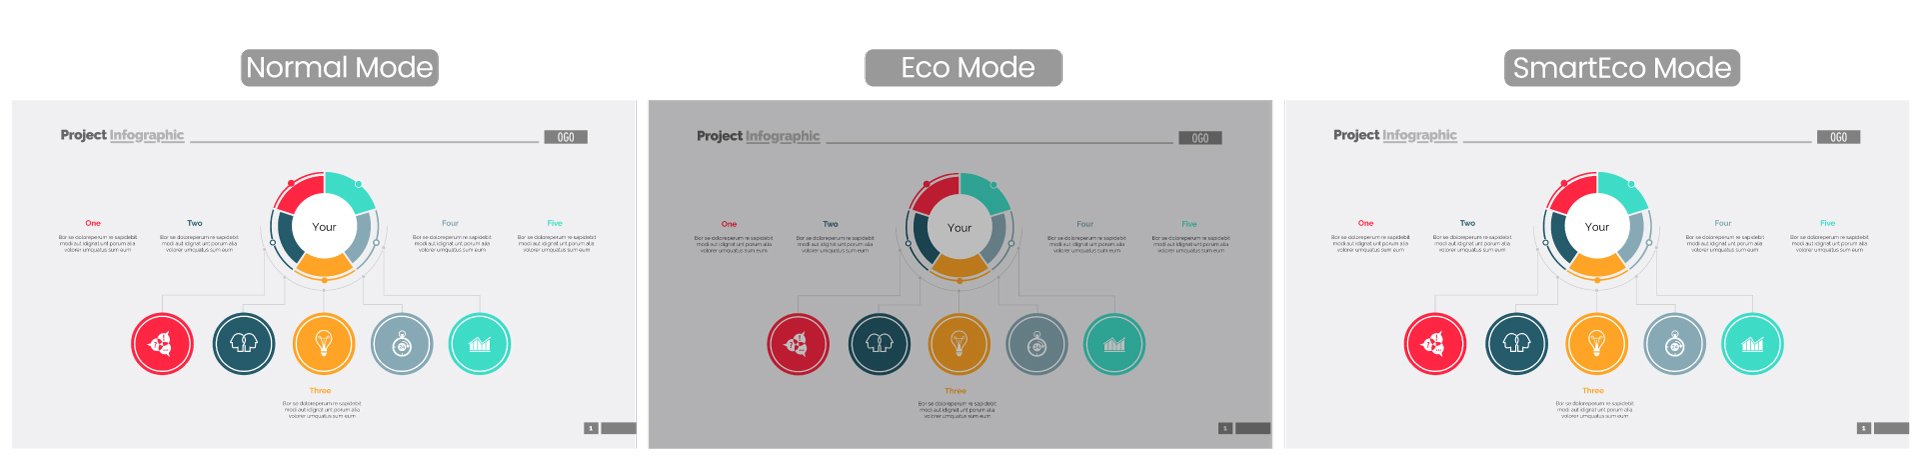 For content that features brighter images, Eco mode will produce dimmer images than SmartEco but will save more energy/ For content that features darker images, SmartEco will produce dimmer images than Eco mode but save more energy